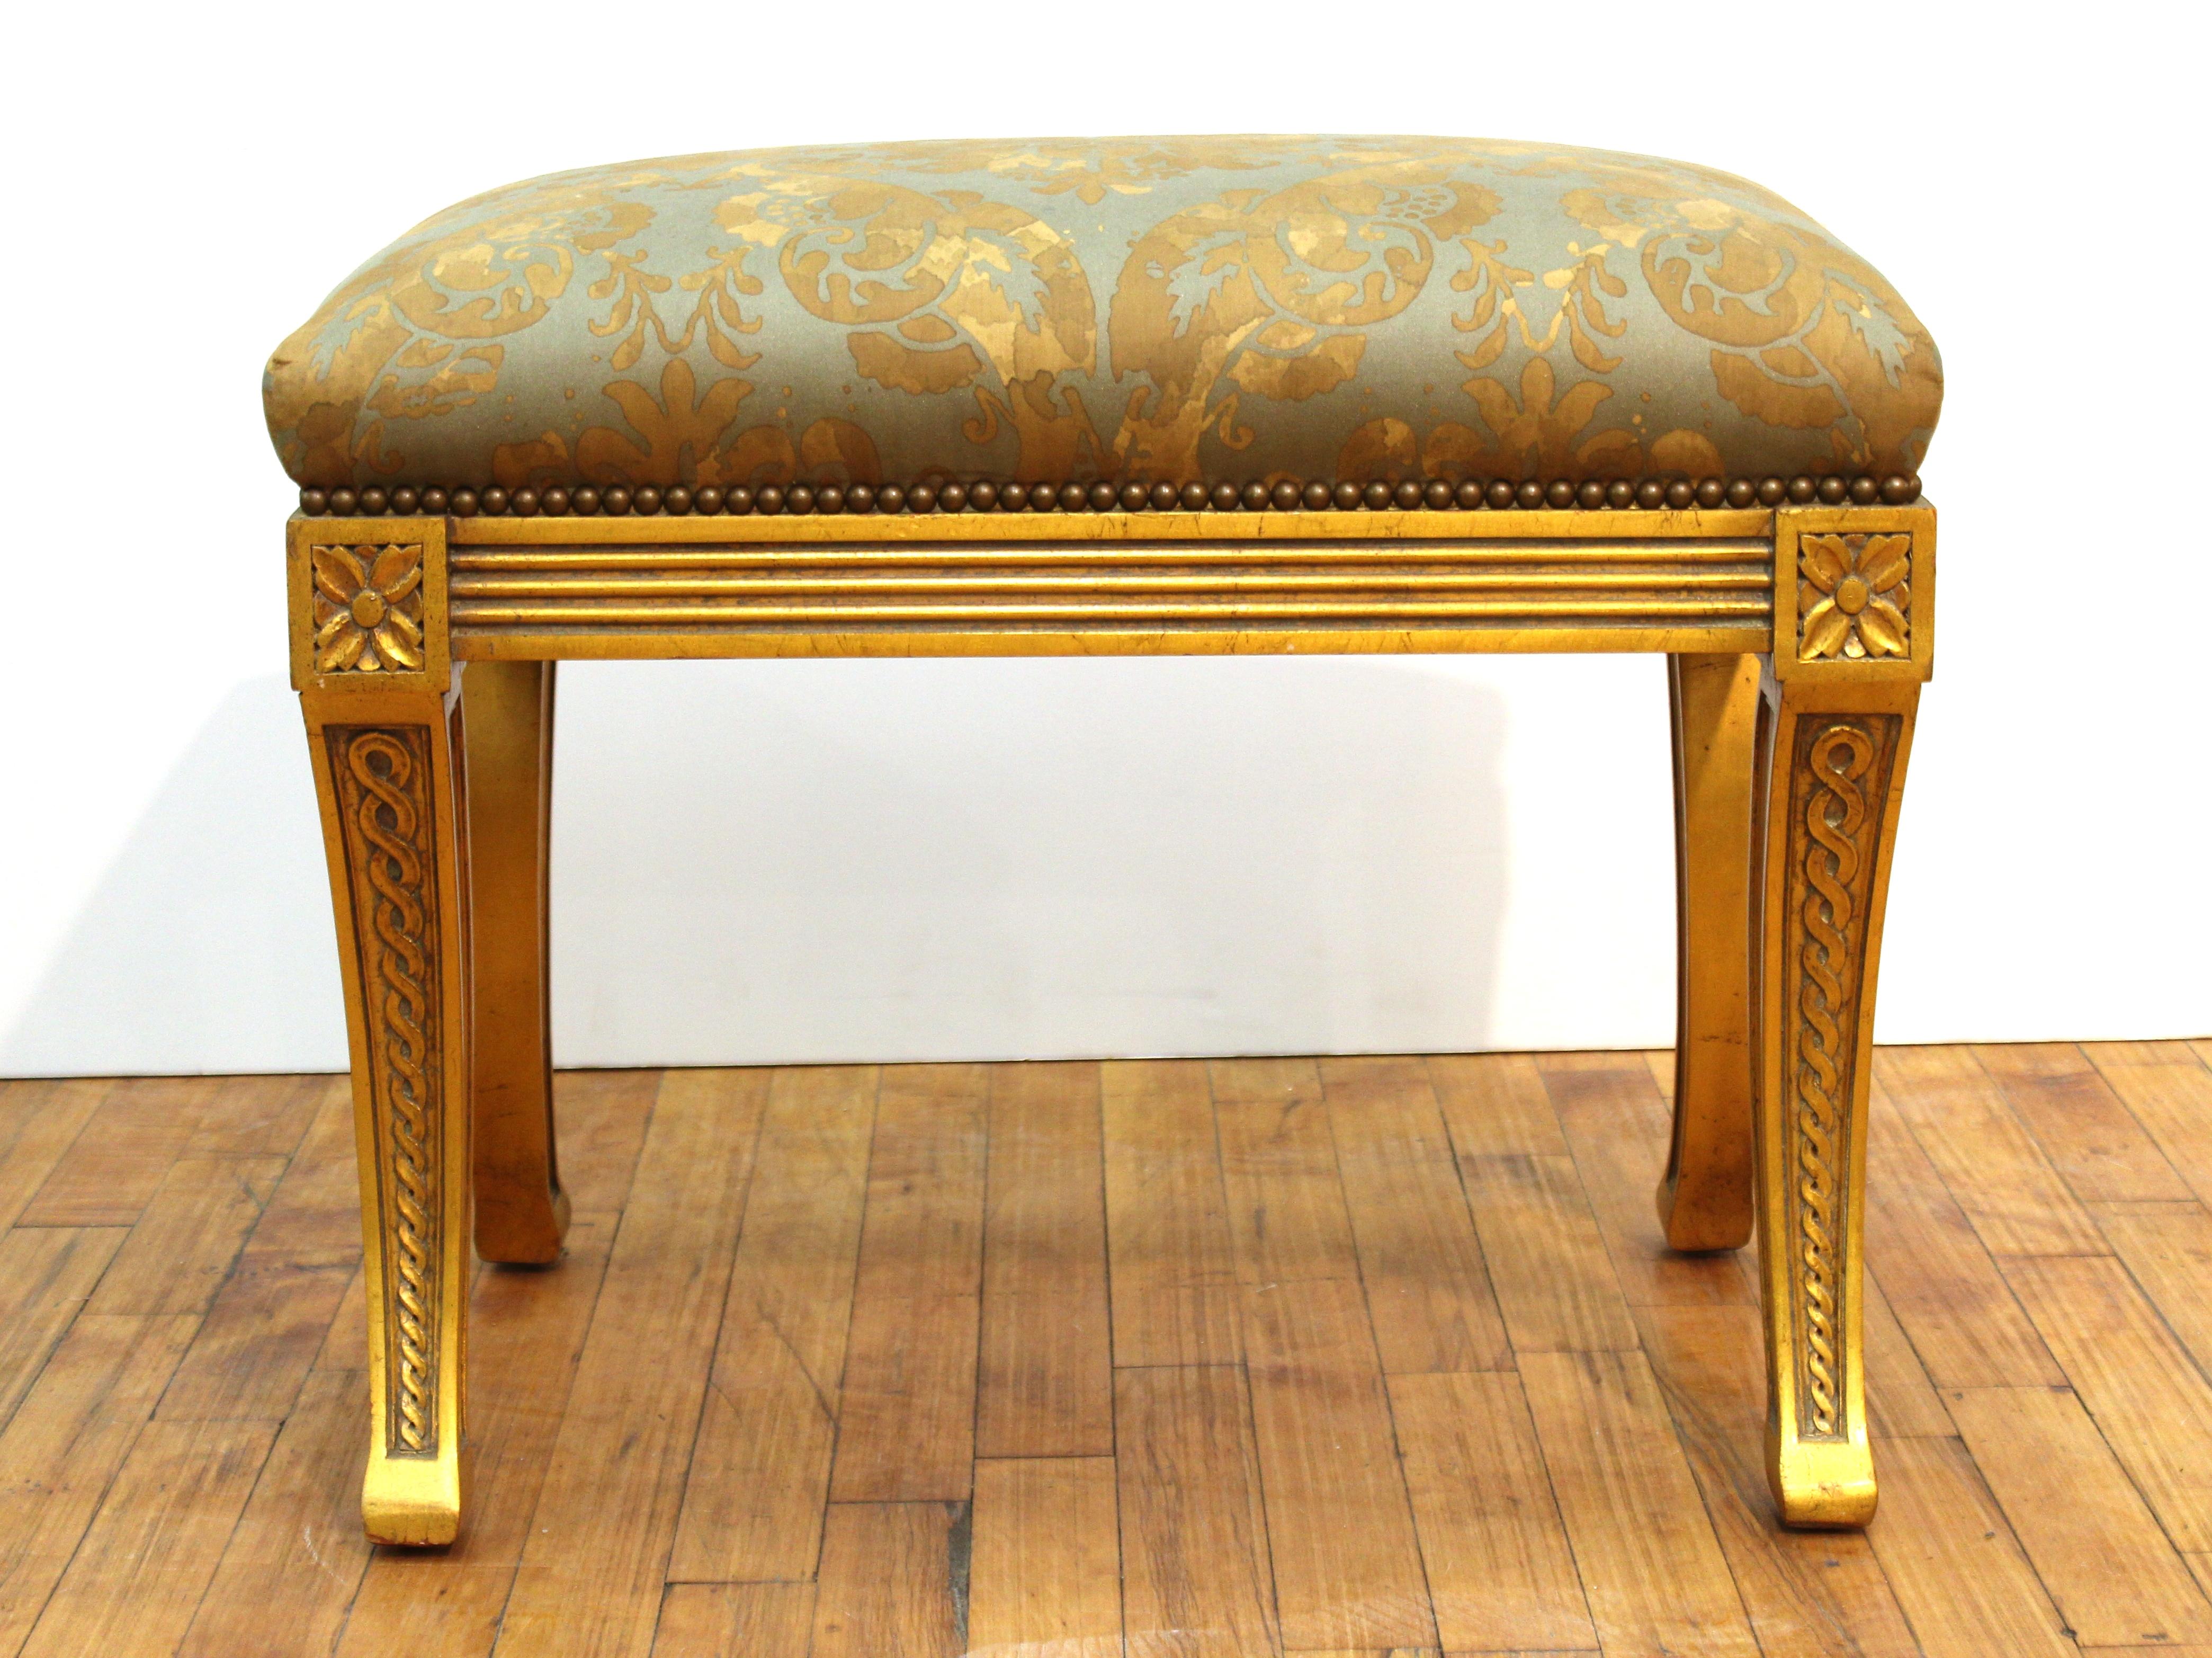 Neoclassical Revival Style Giltwood Bench In Good Condition For Sale In New York, NY